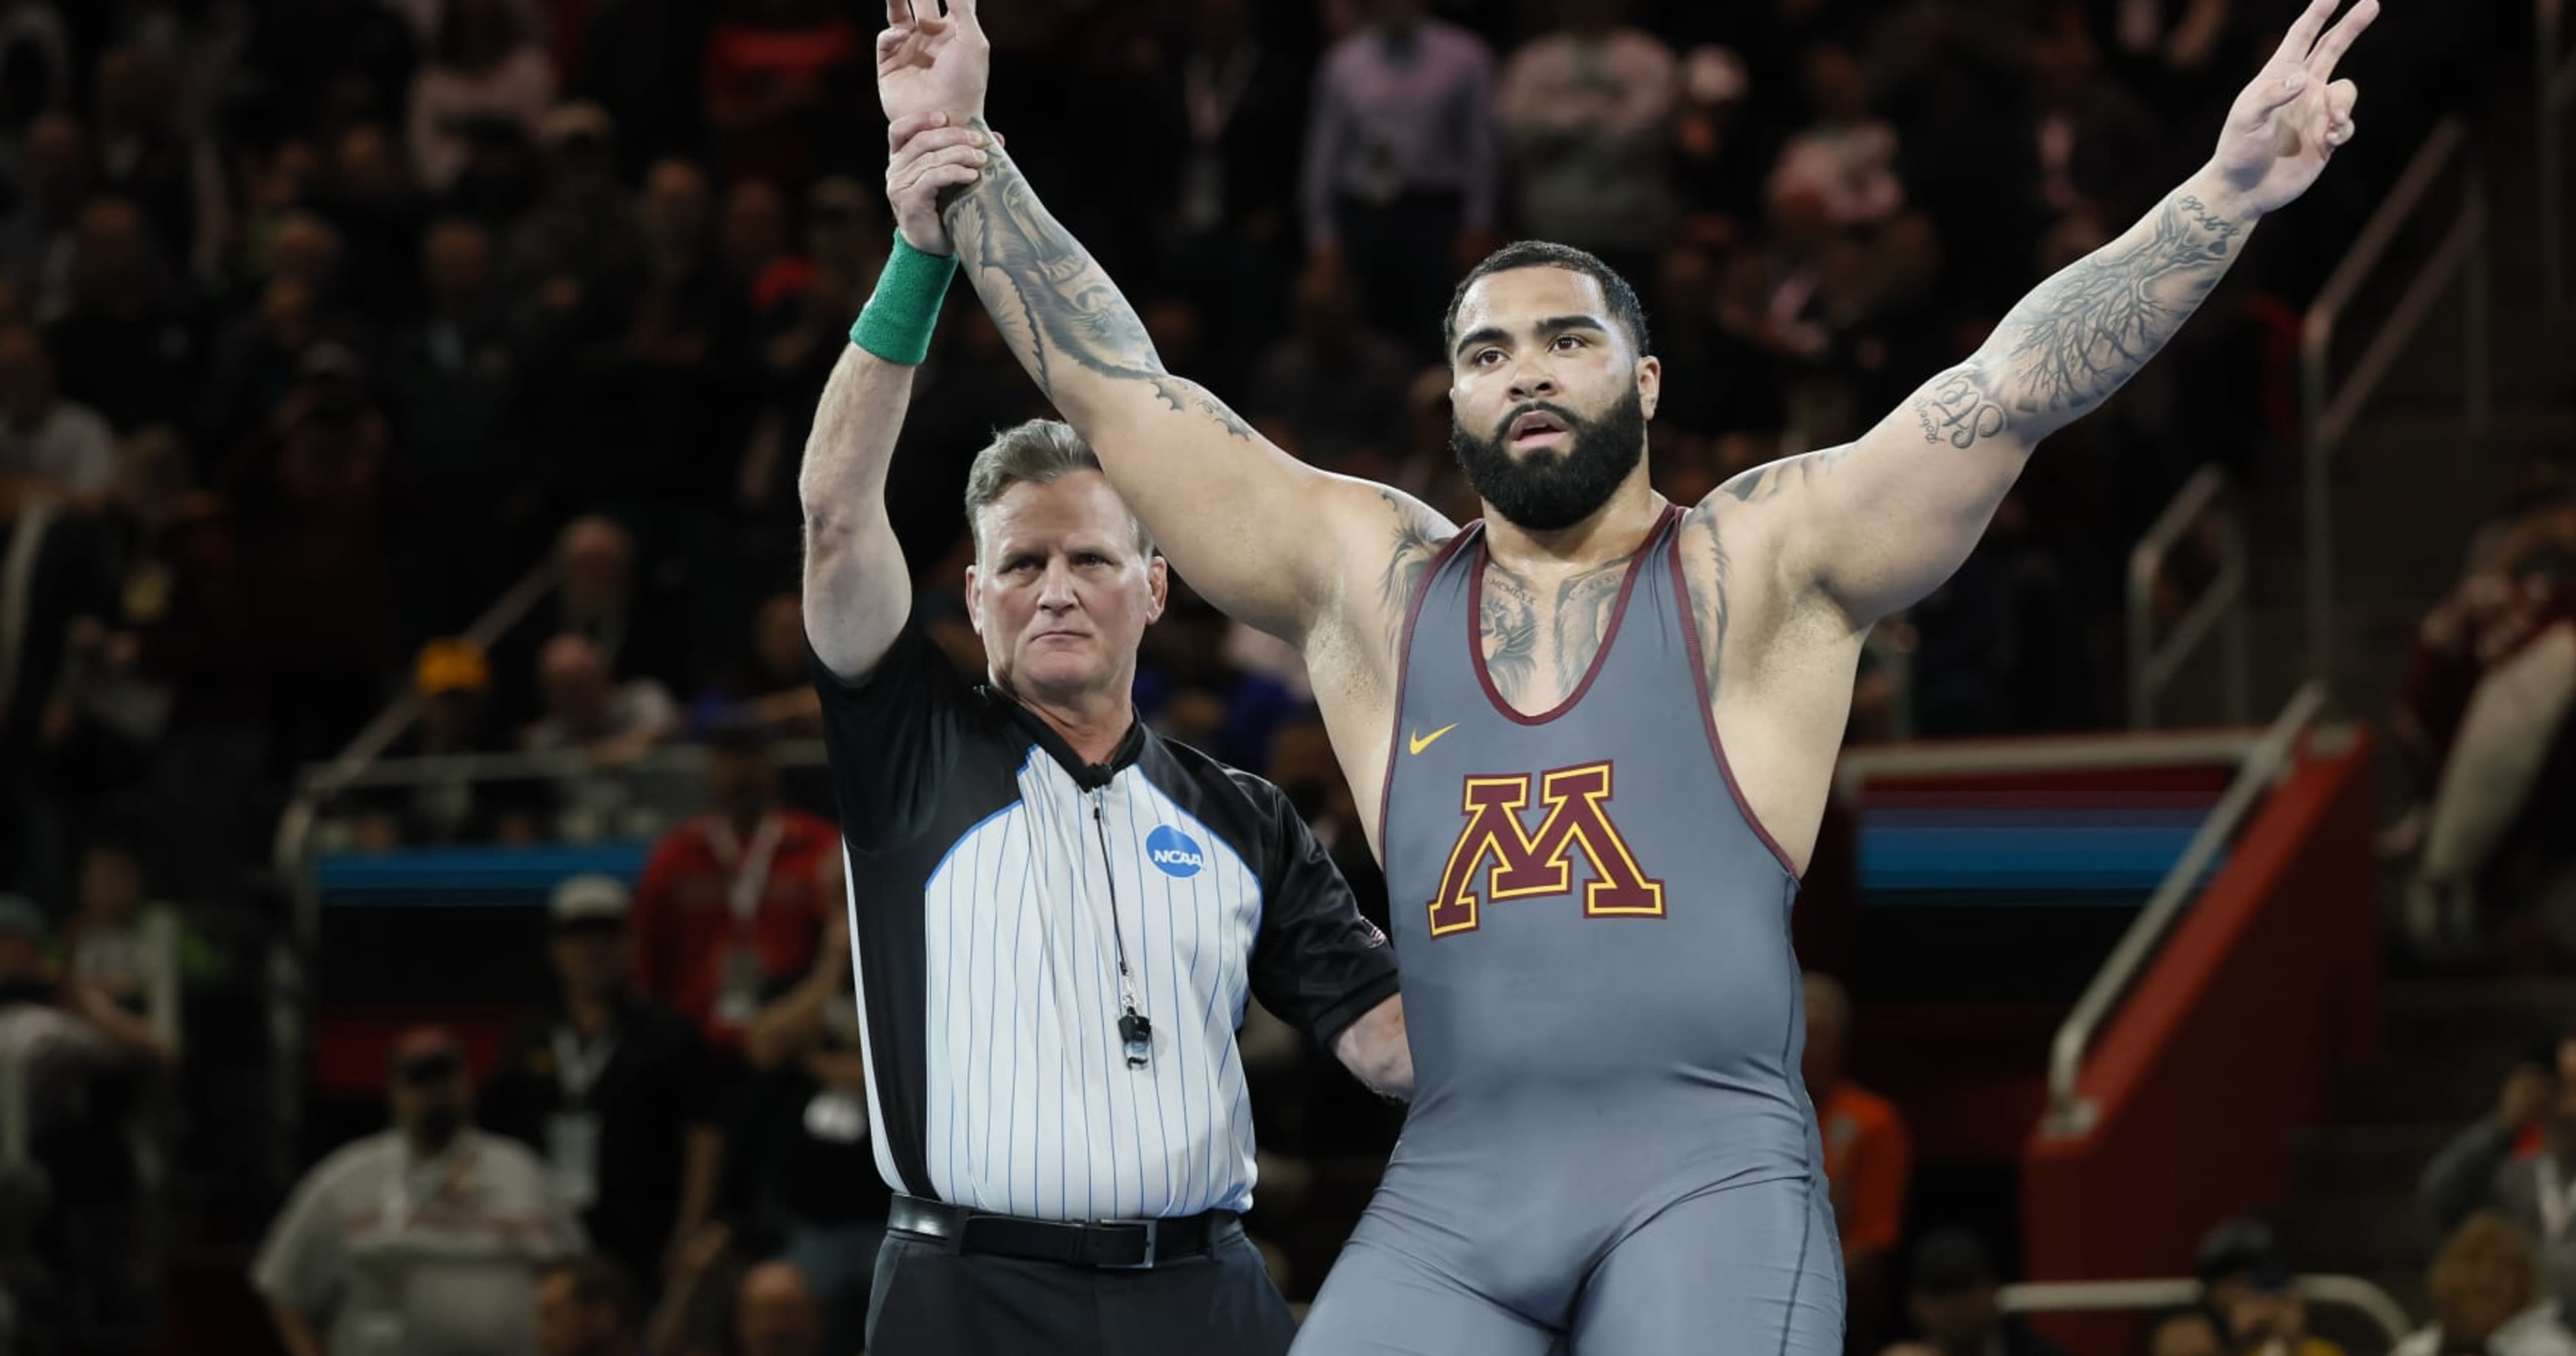 Olympic Gold Medalist Gable Steveson Contacted by NFL Teams After WWE Release